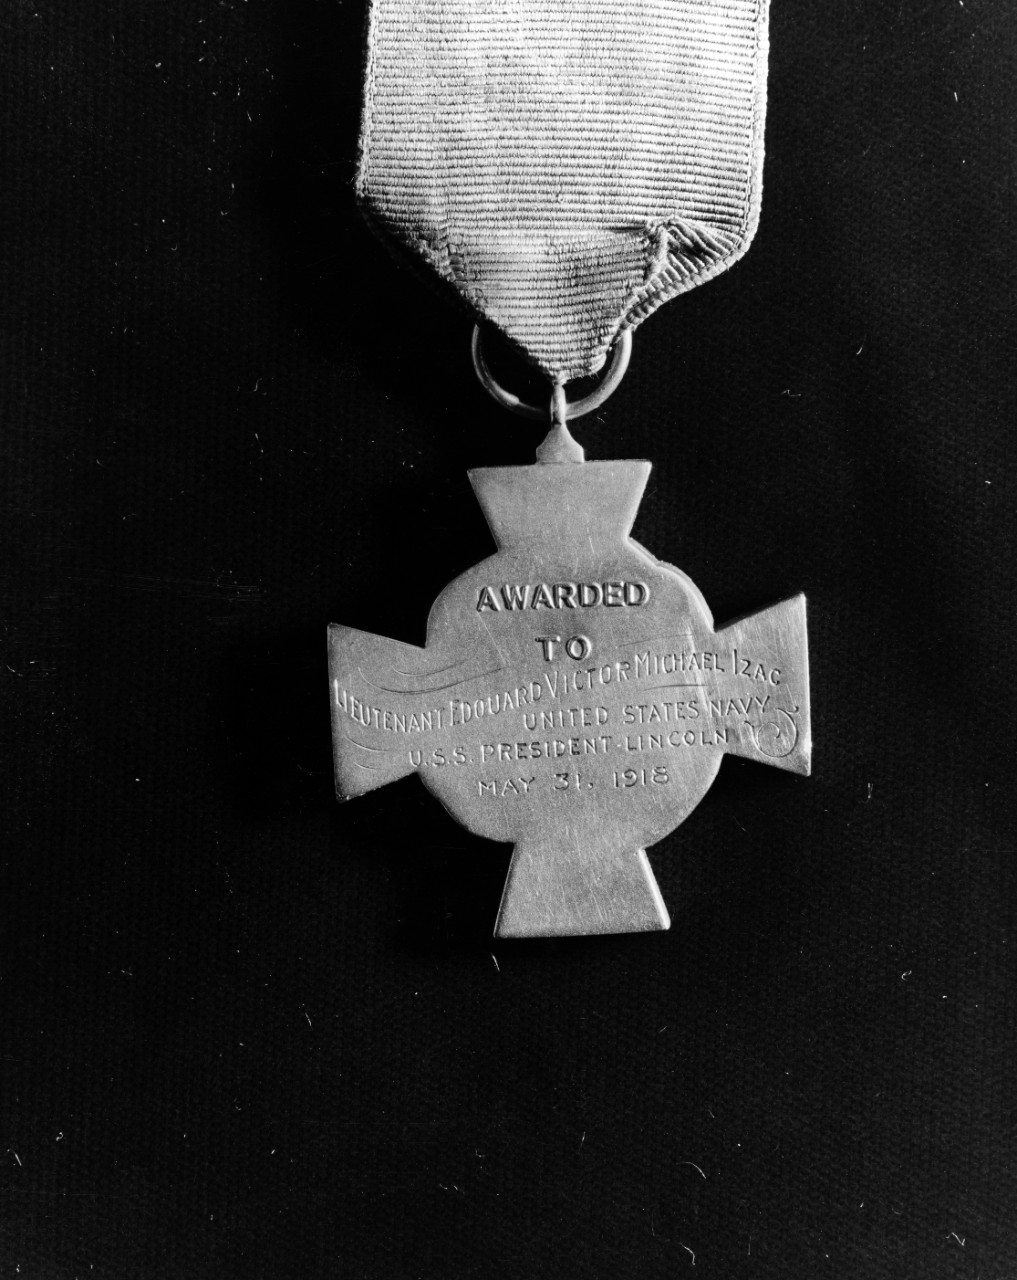 Photo #: NH 82602  The Medal of Honor